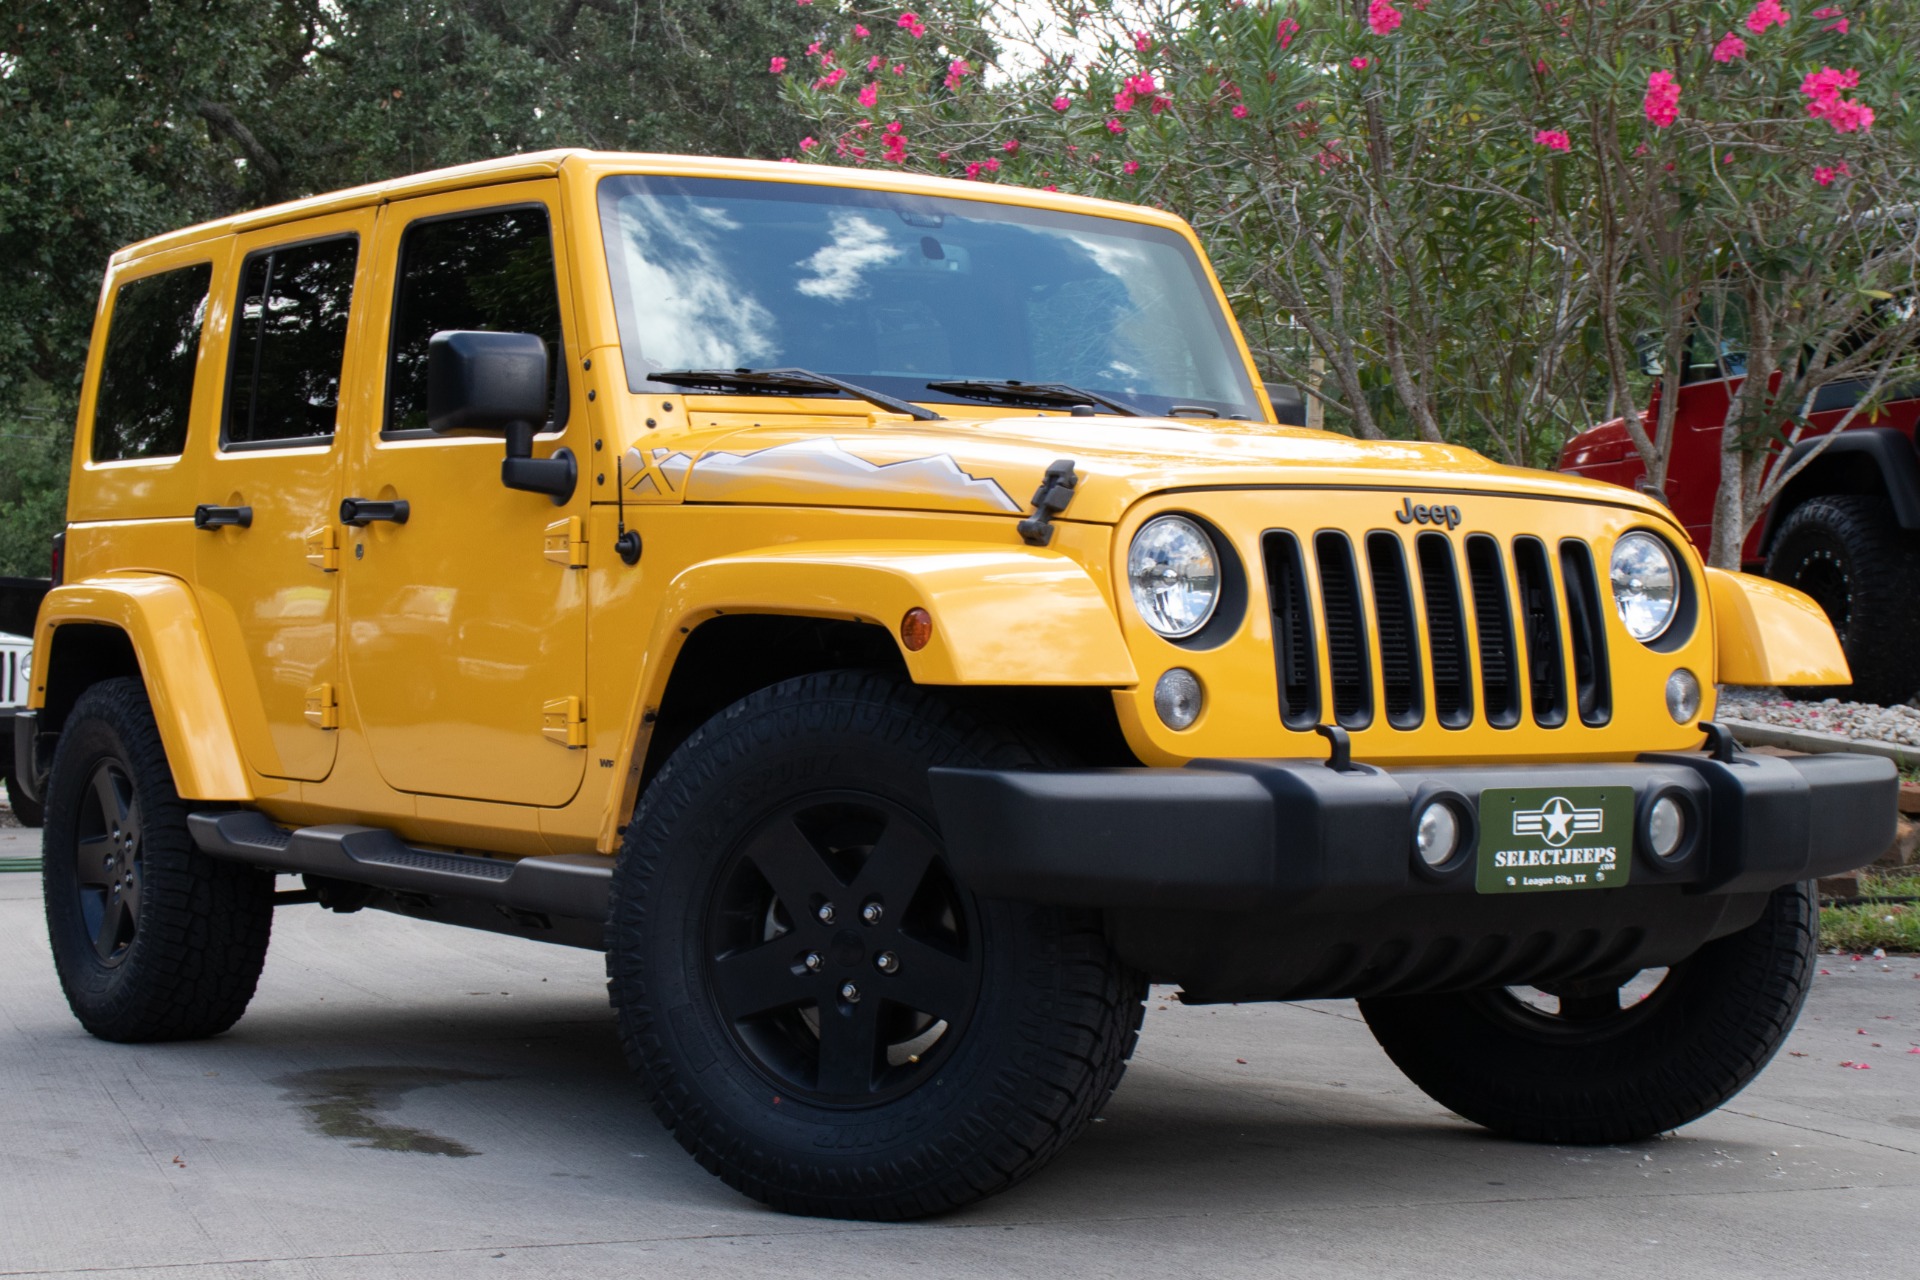 Used 2015 Jeep Wrangler Unlimited X Edition For Sale ($30,995) | Select  Jeeps Inc. Stock #583627